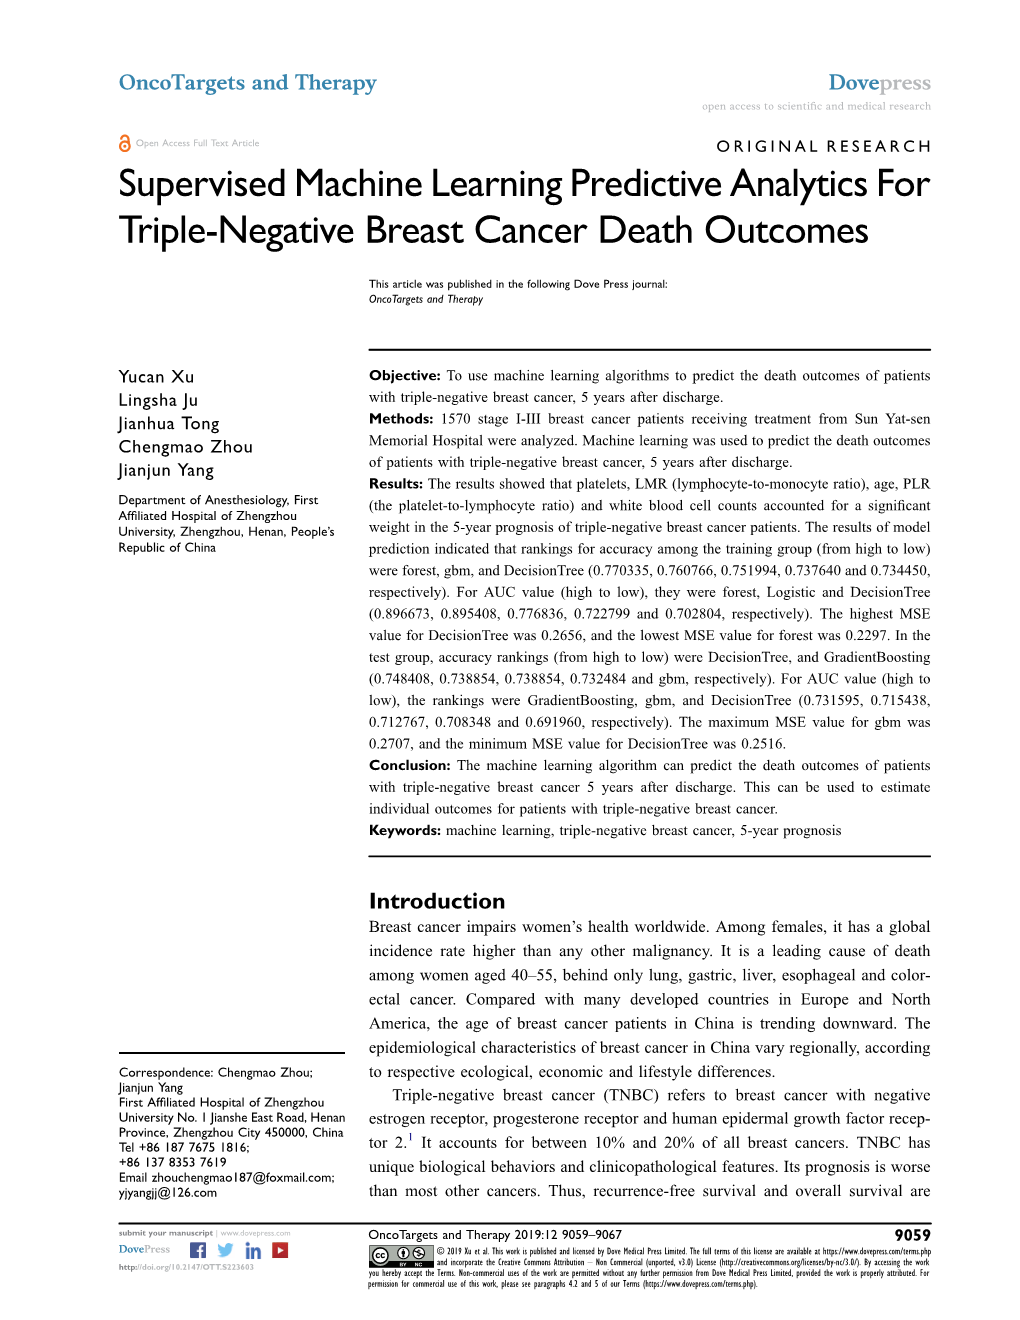 Supervised Machine Learning Predictive Analytics for Triple-Negative Breast Cancer Death Outcomes